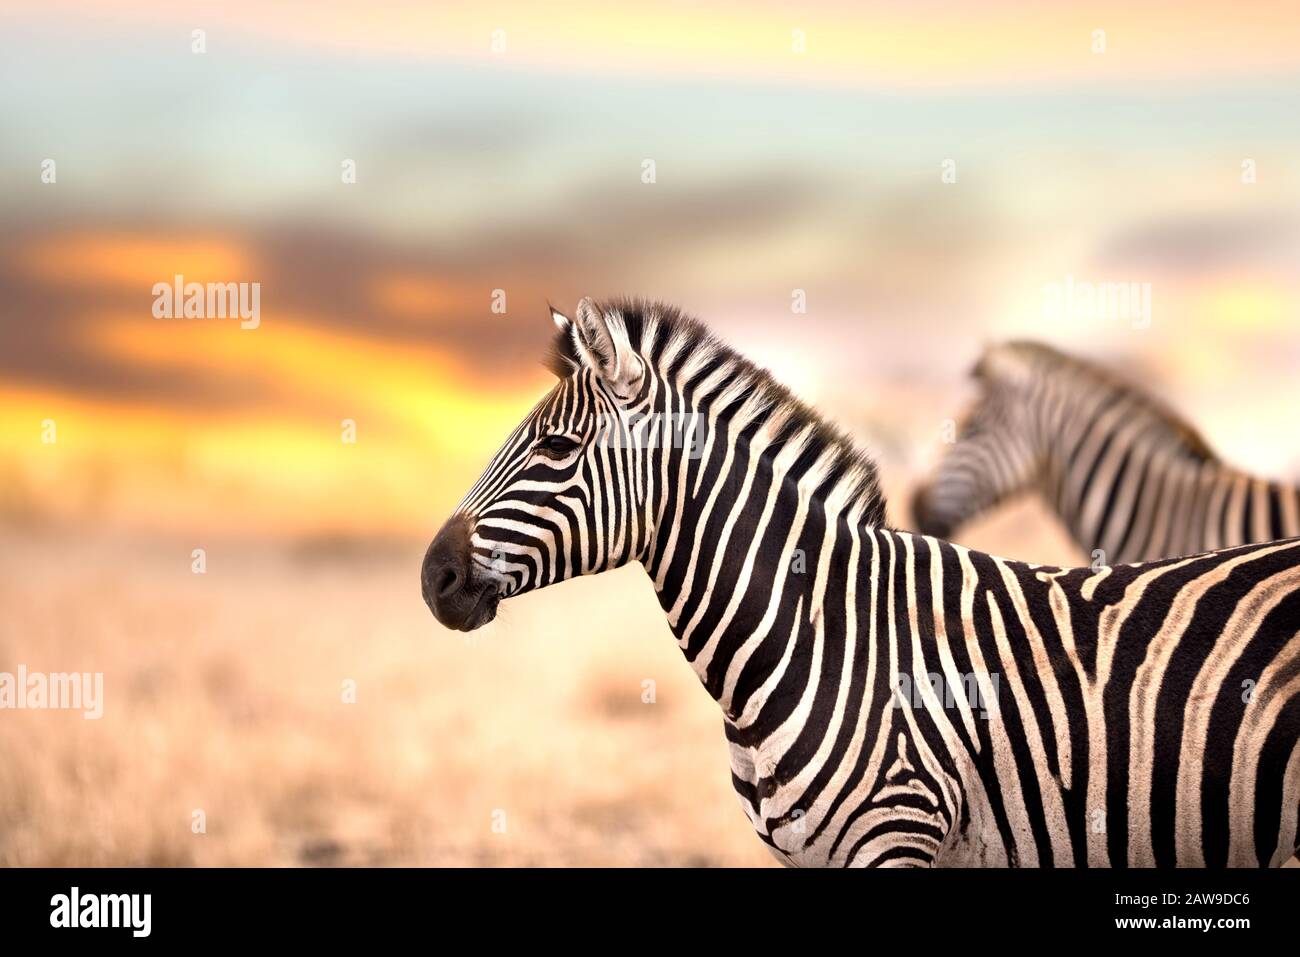 Zebras during sunset in Africa Stock Photo